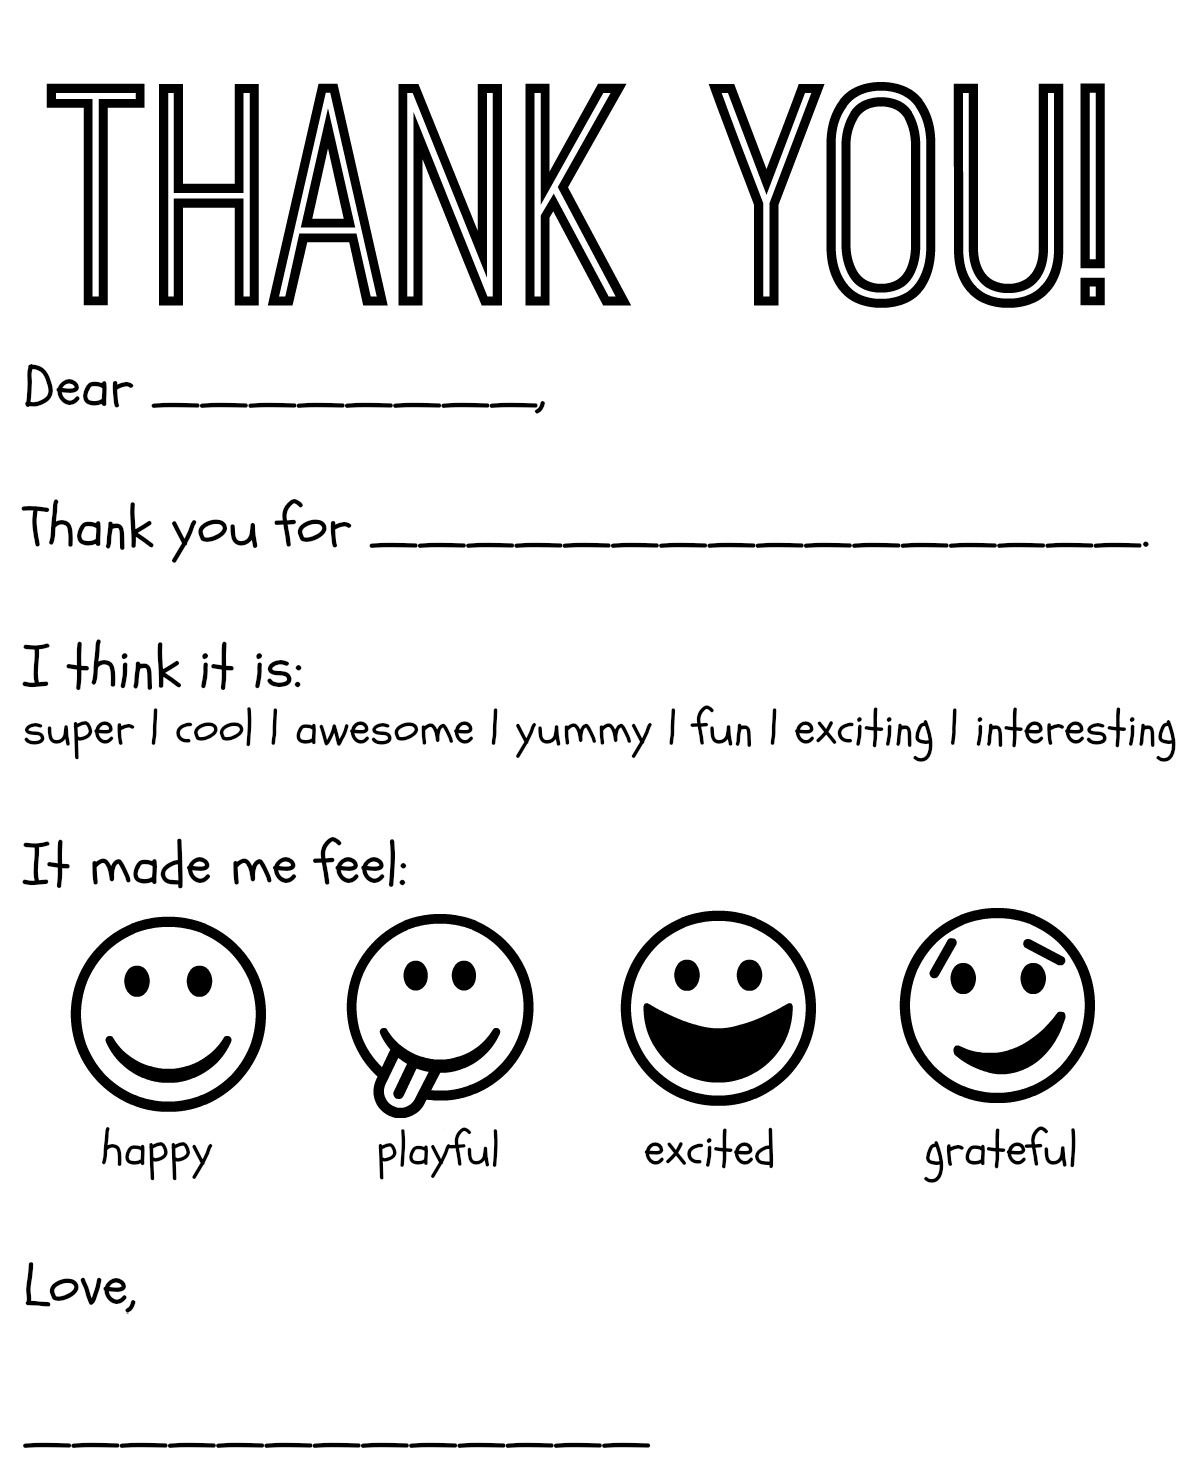 Free Printable Kids Thank You Cards To Color | Thank You Card - Free Printable Teacher Appreciation Cards To Color